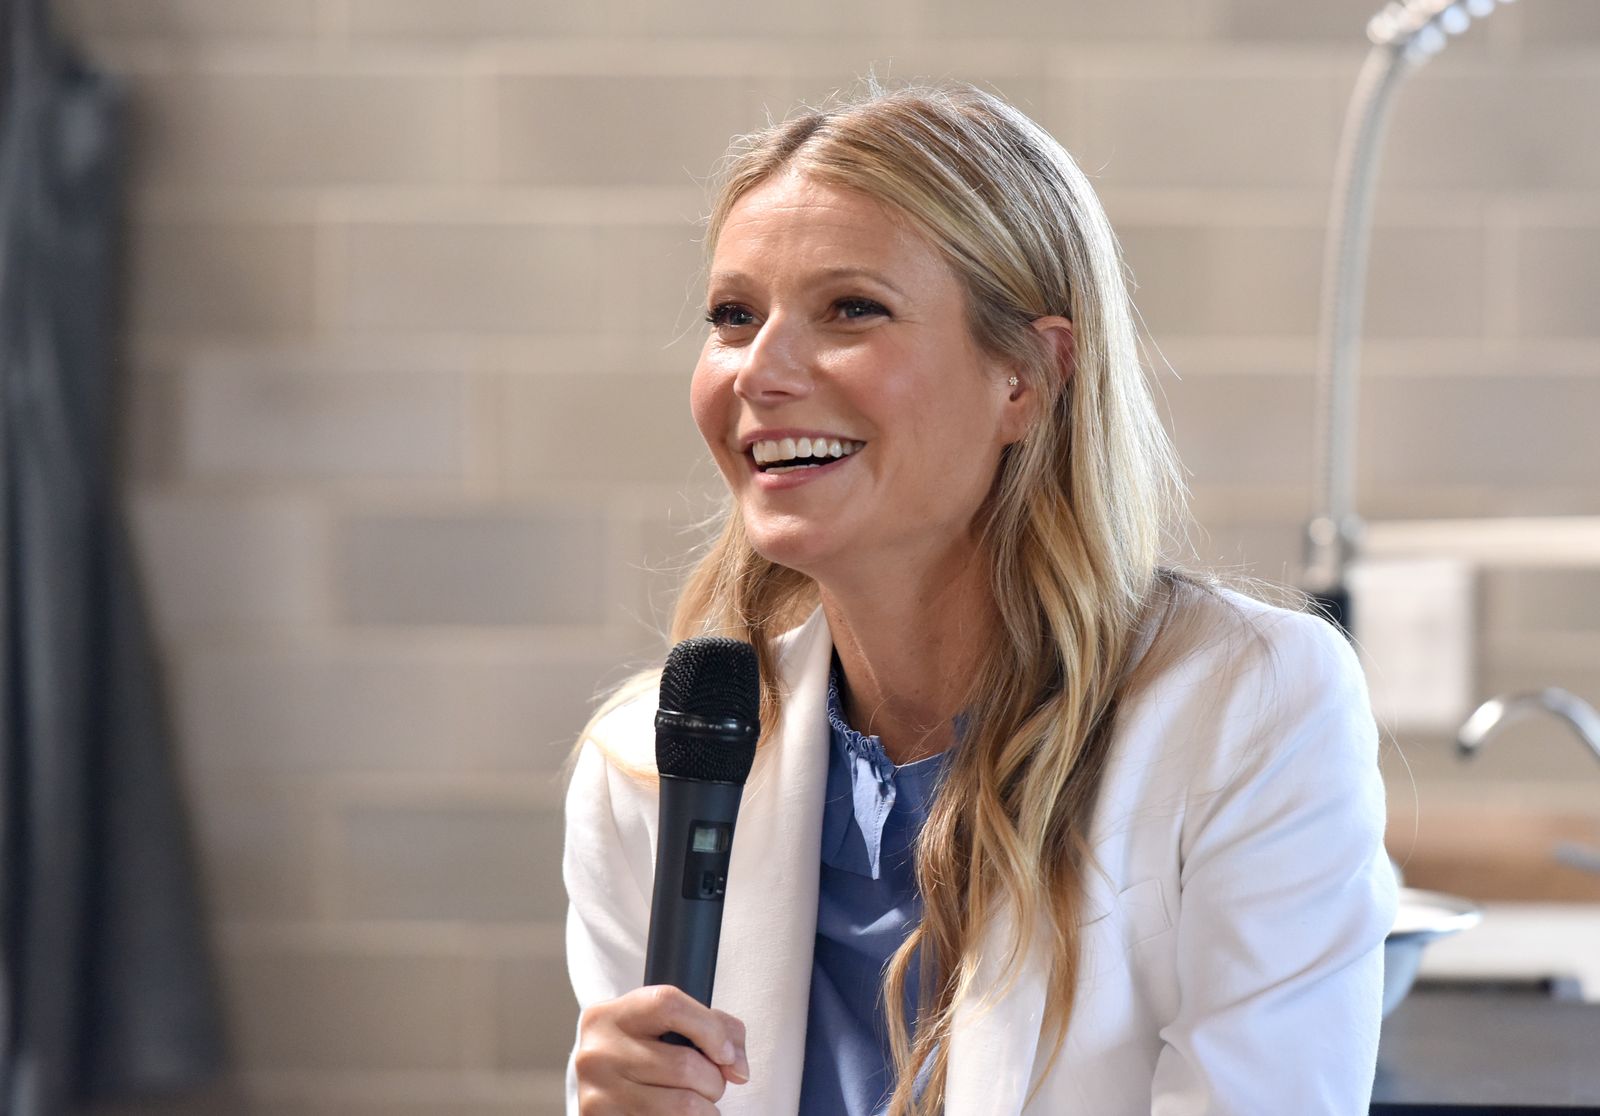 Gwyneth Paltrow speaking at a Goop event in Santa Monica, California May 16, 2017 | Getty Images